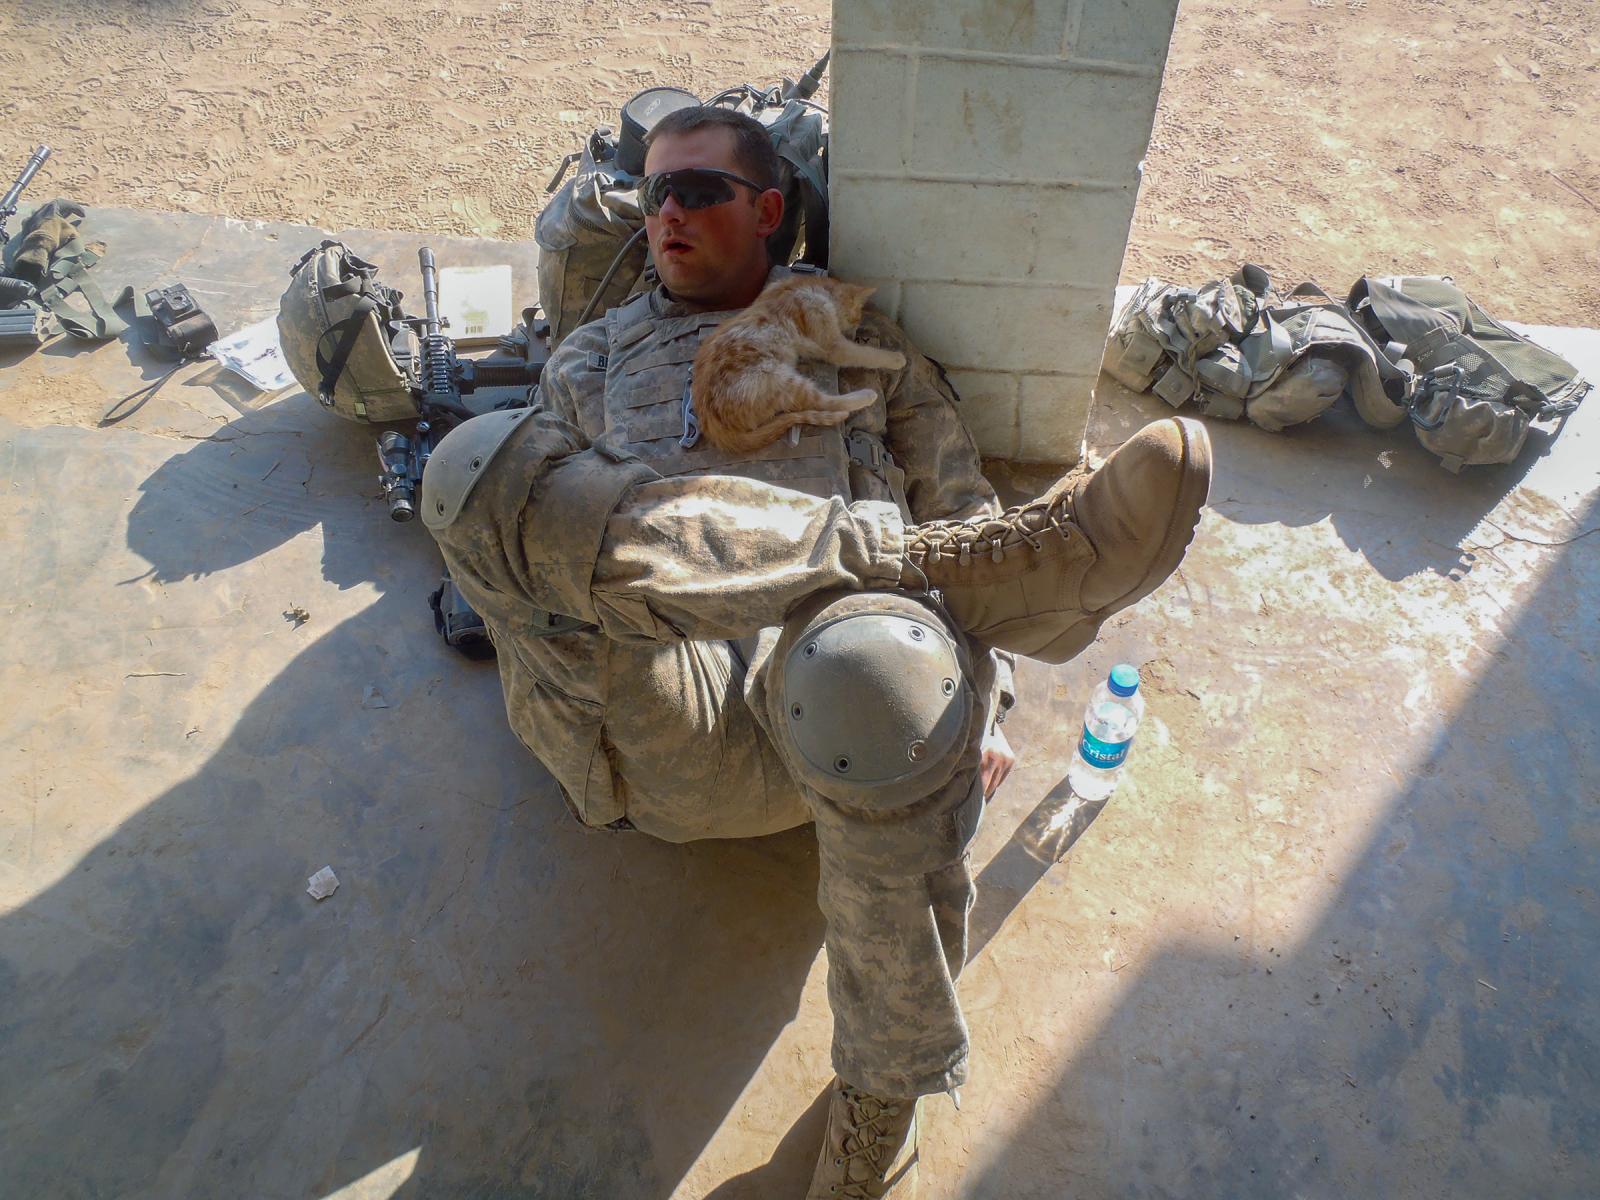 Soldiers rest when they can. He...houlder in Kunduz, Afghanistan.